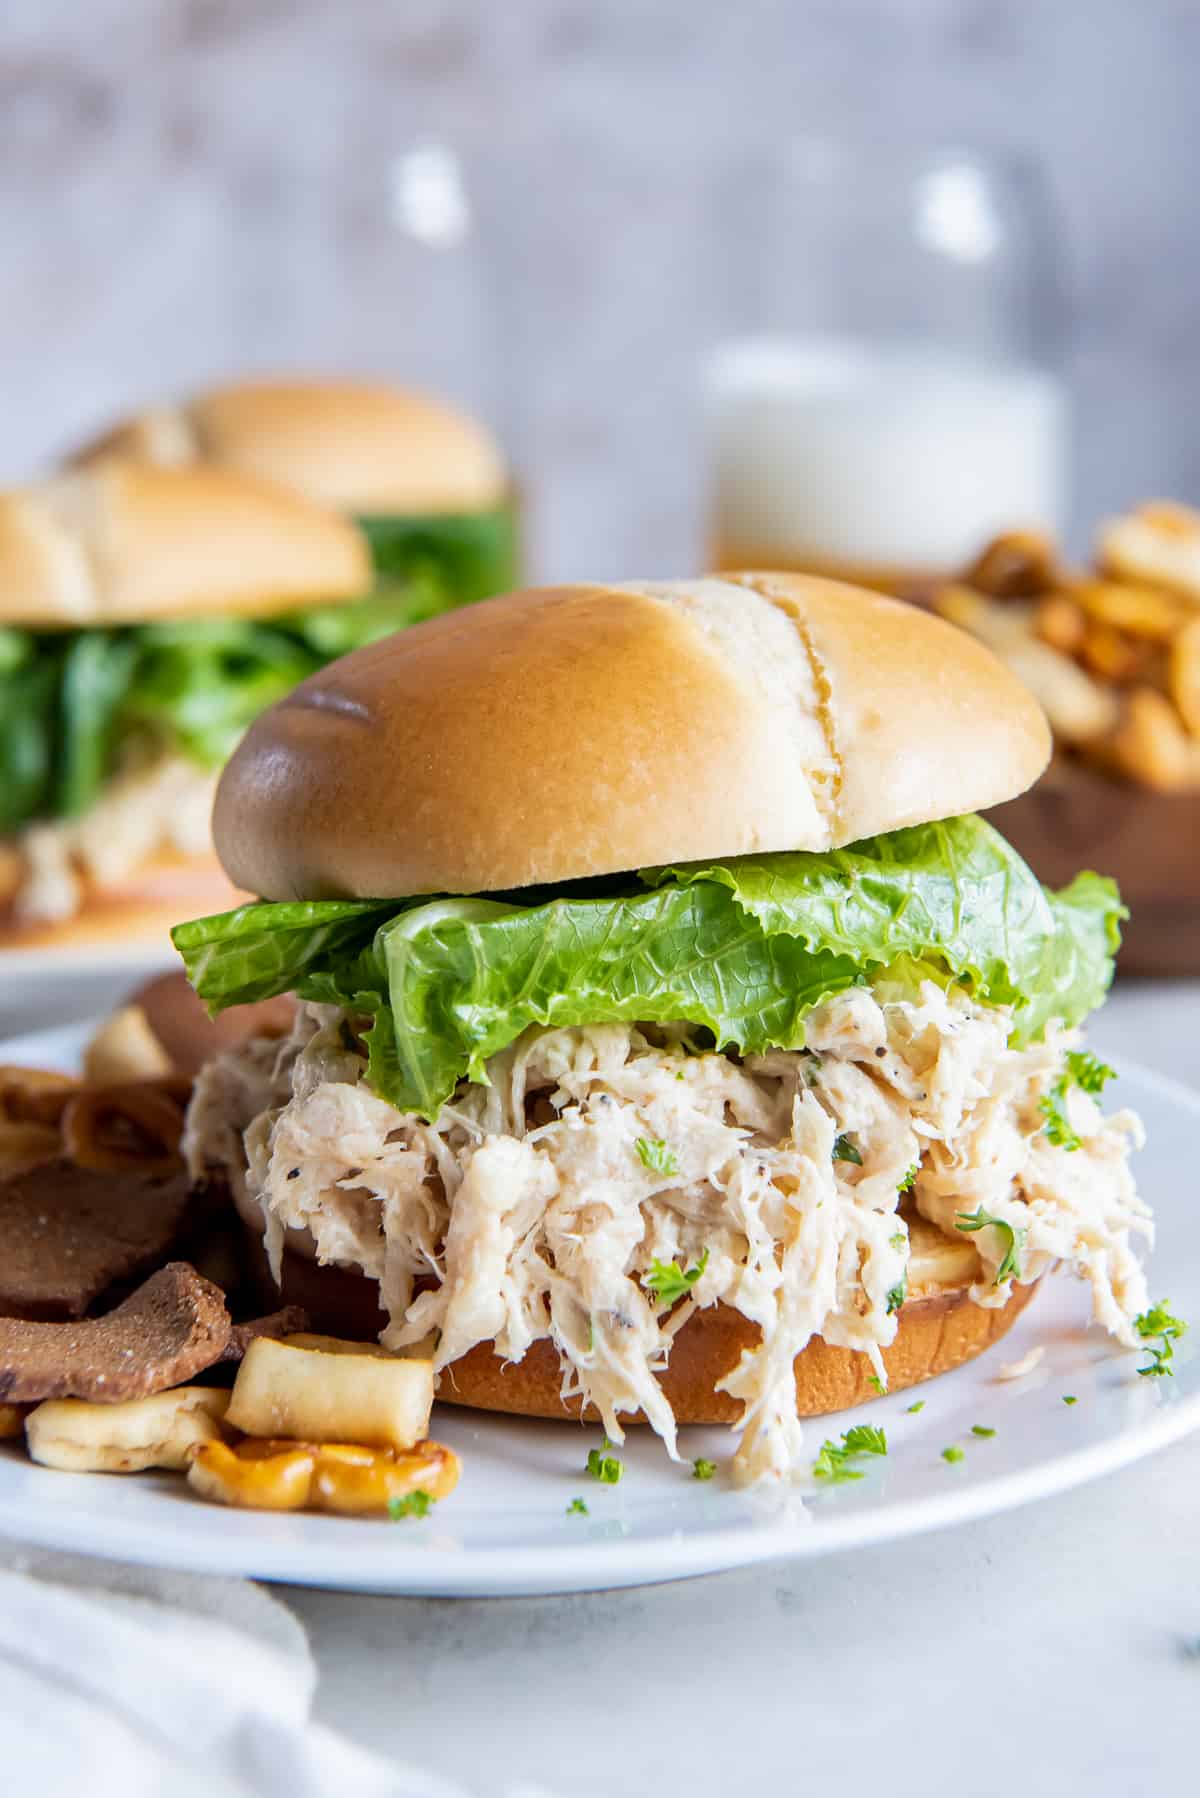 A bun stuffed full with shredded Caesar chicken and romaine lettuce on a white plate with pretzel snack mix.